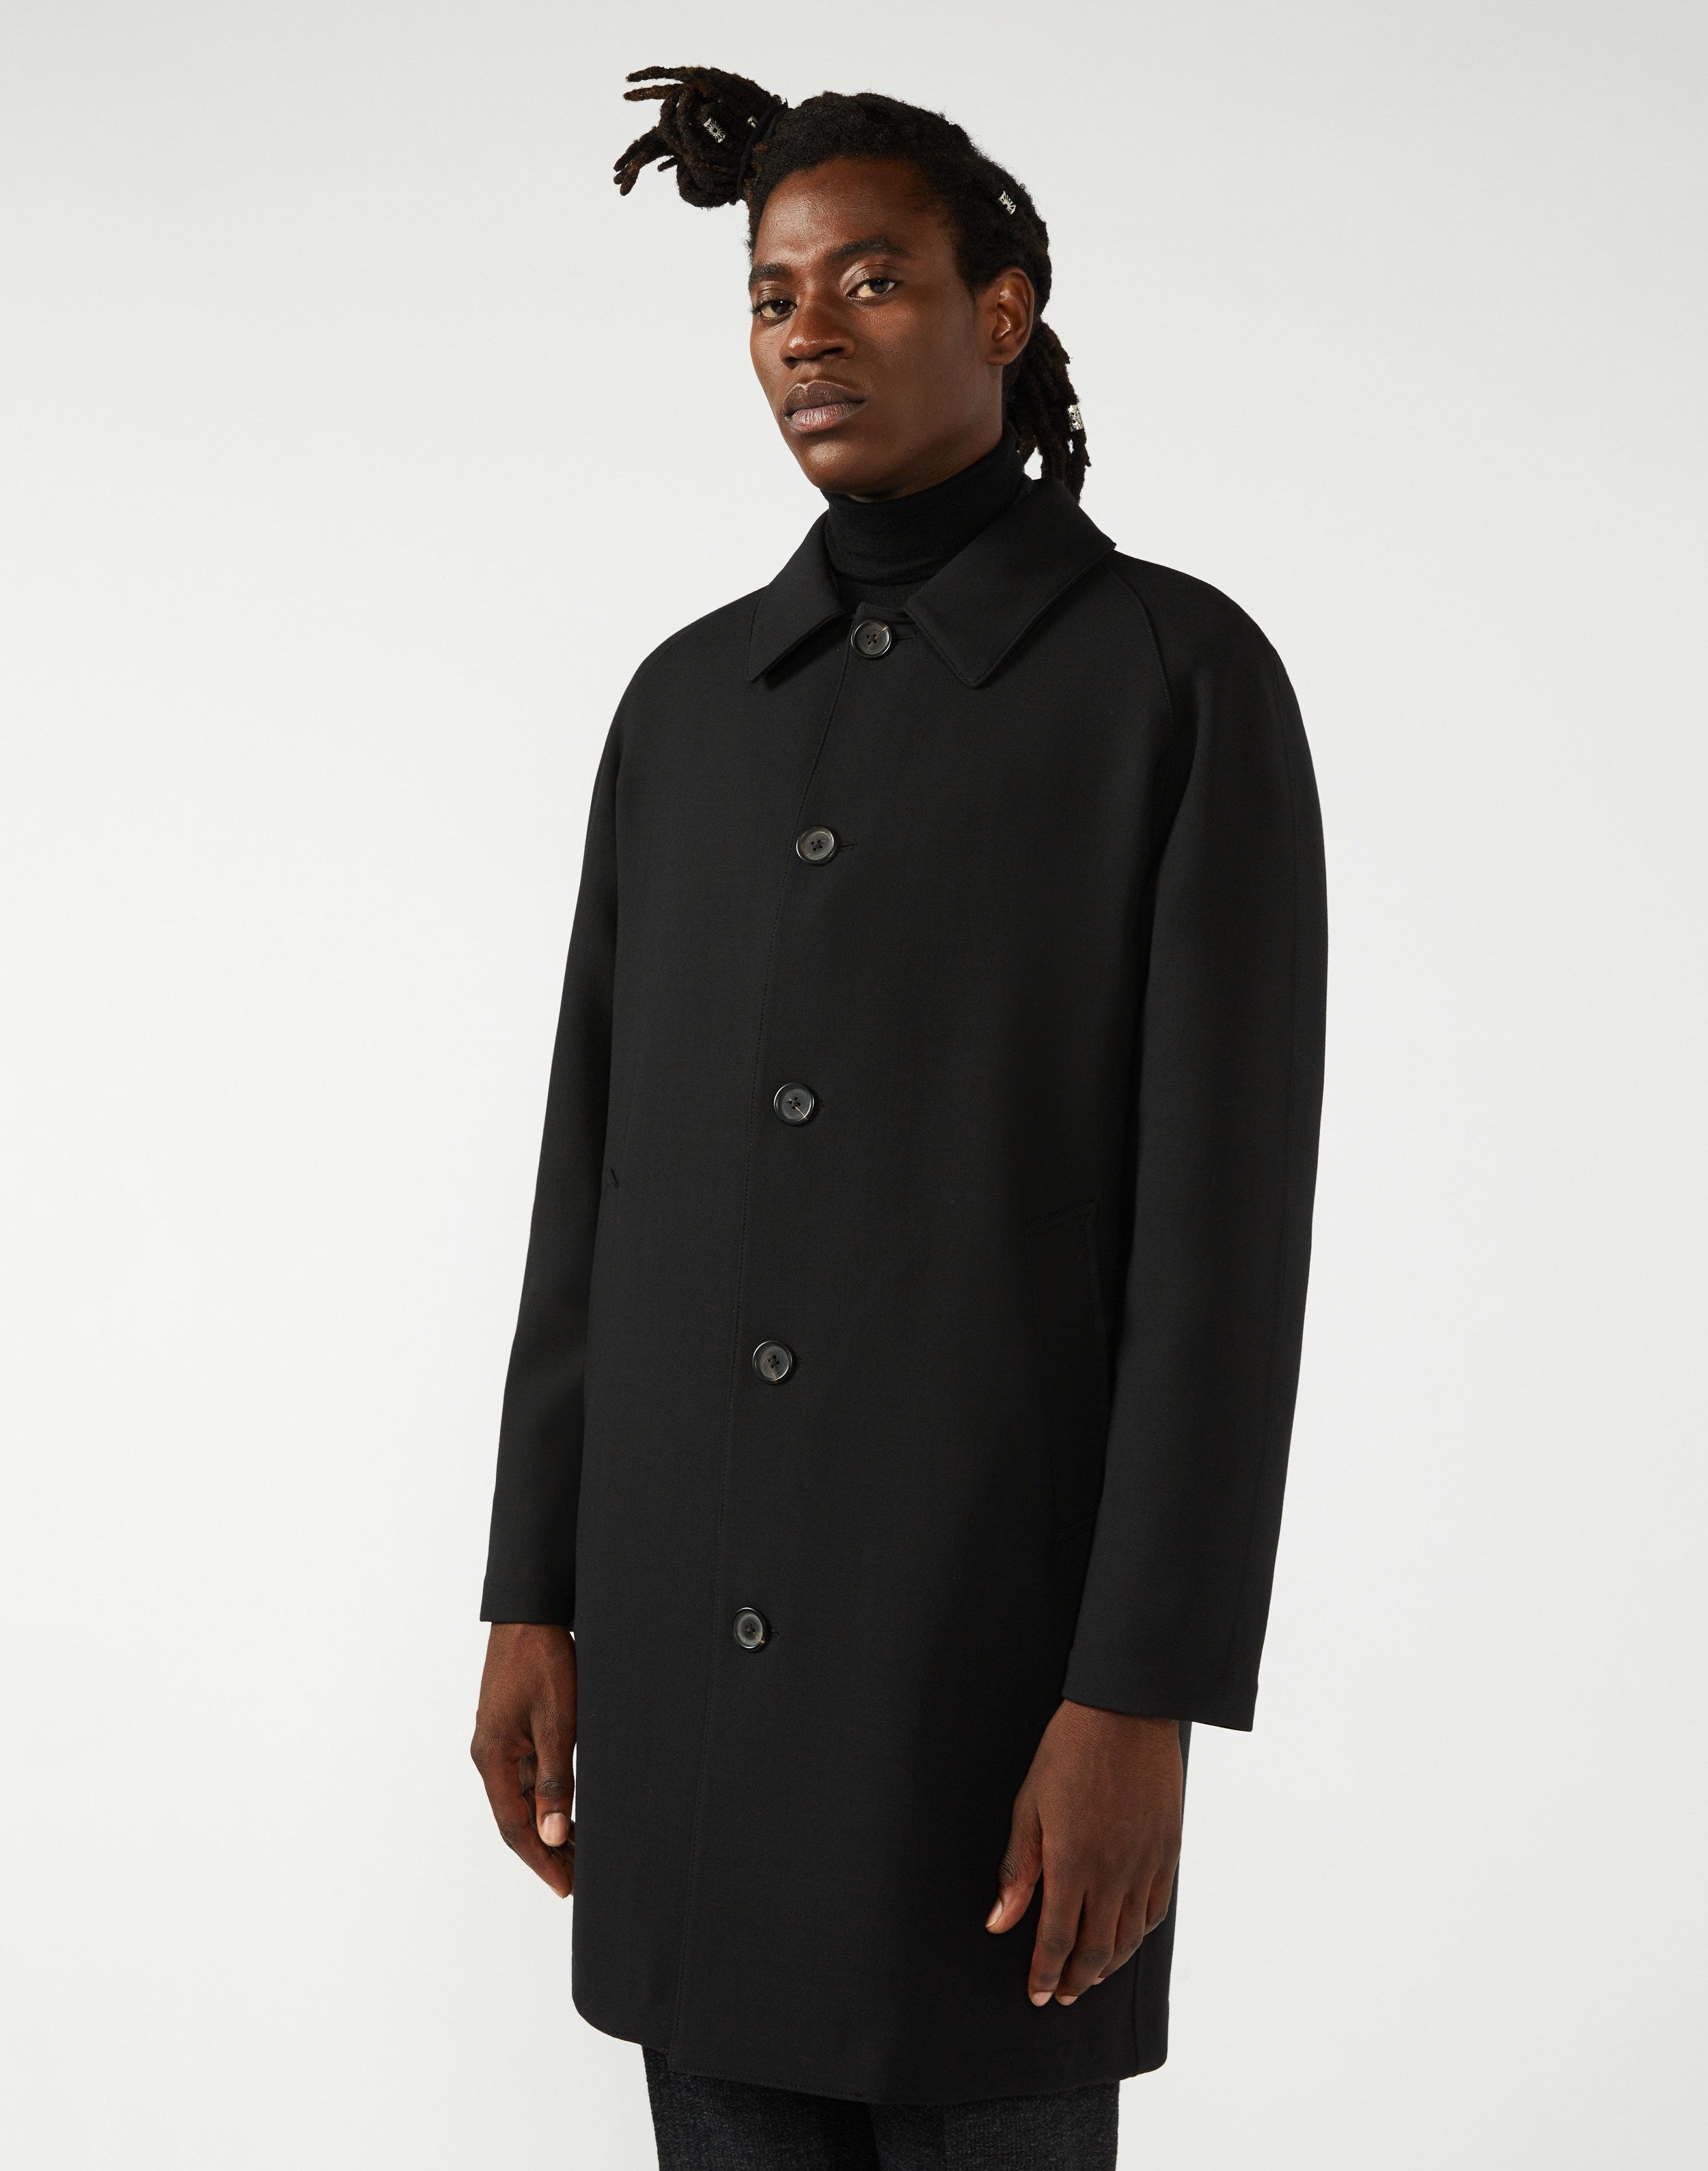 Black trench coat in a high-tech fabric - Easy Wear 